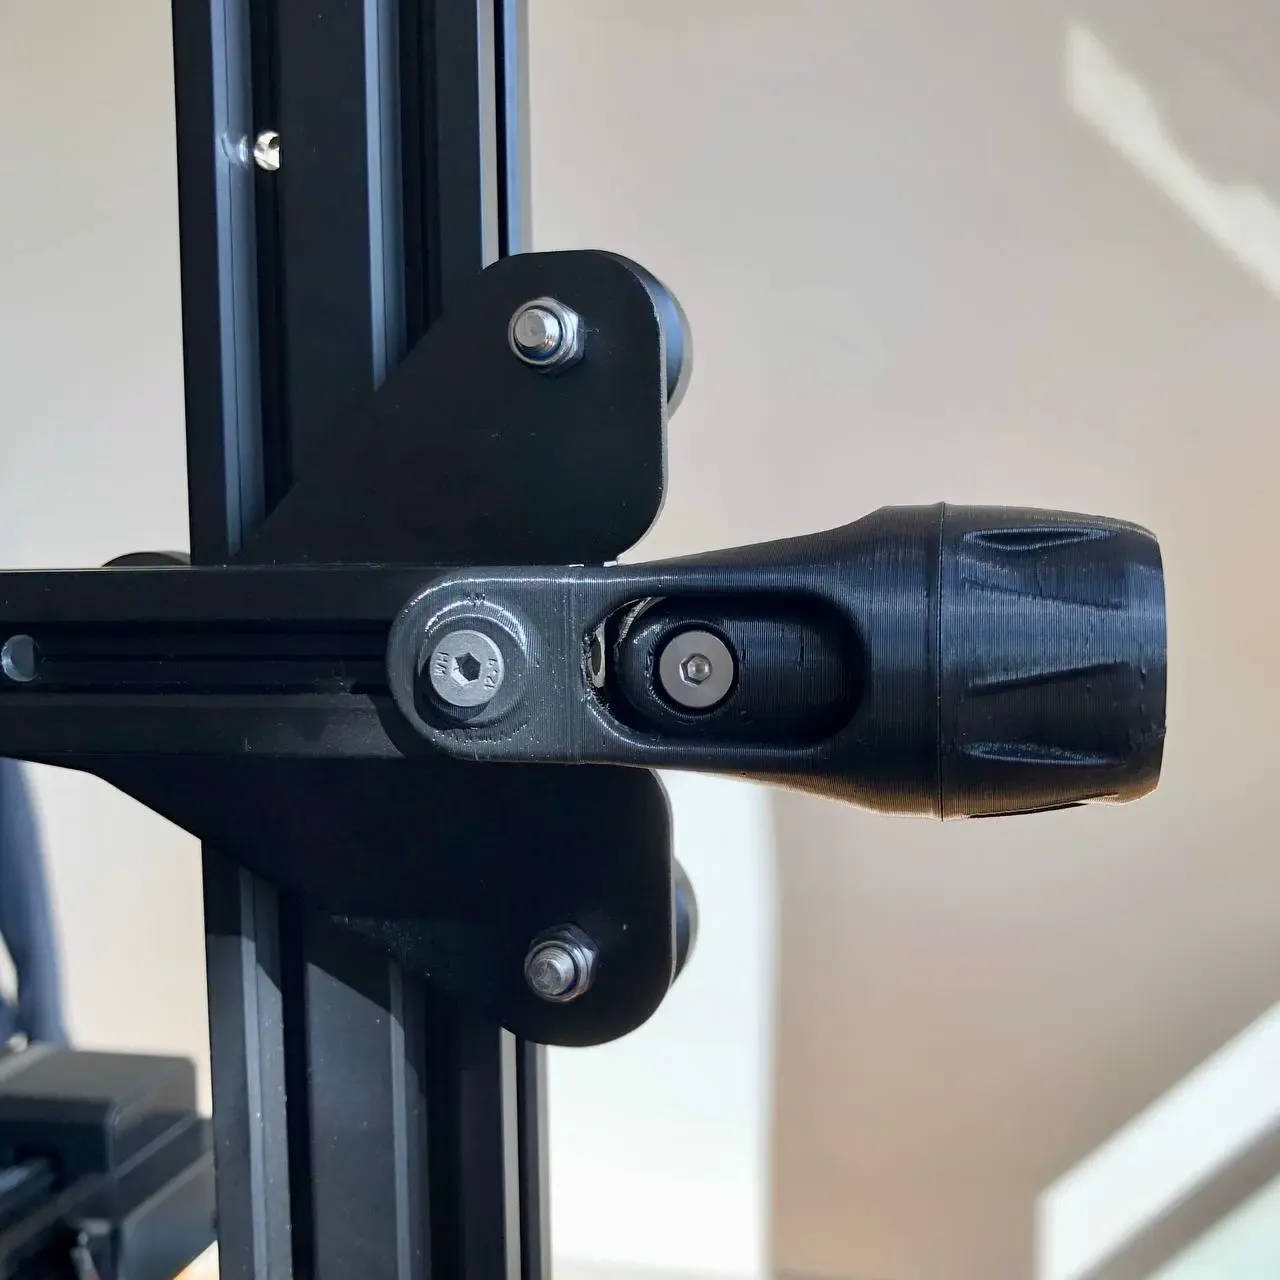 Ender 3 V2 X axis belt tensioner replacement